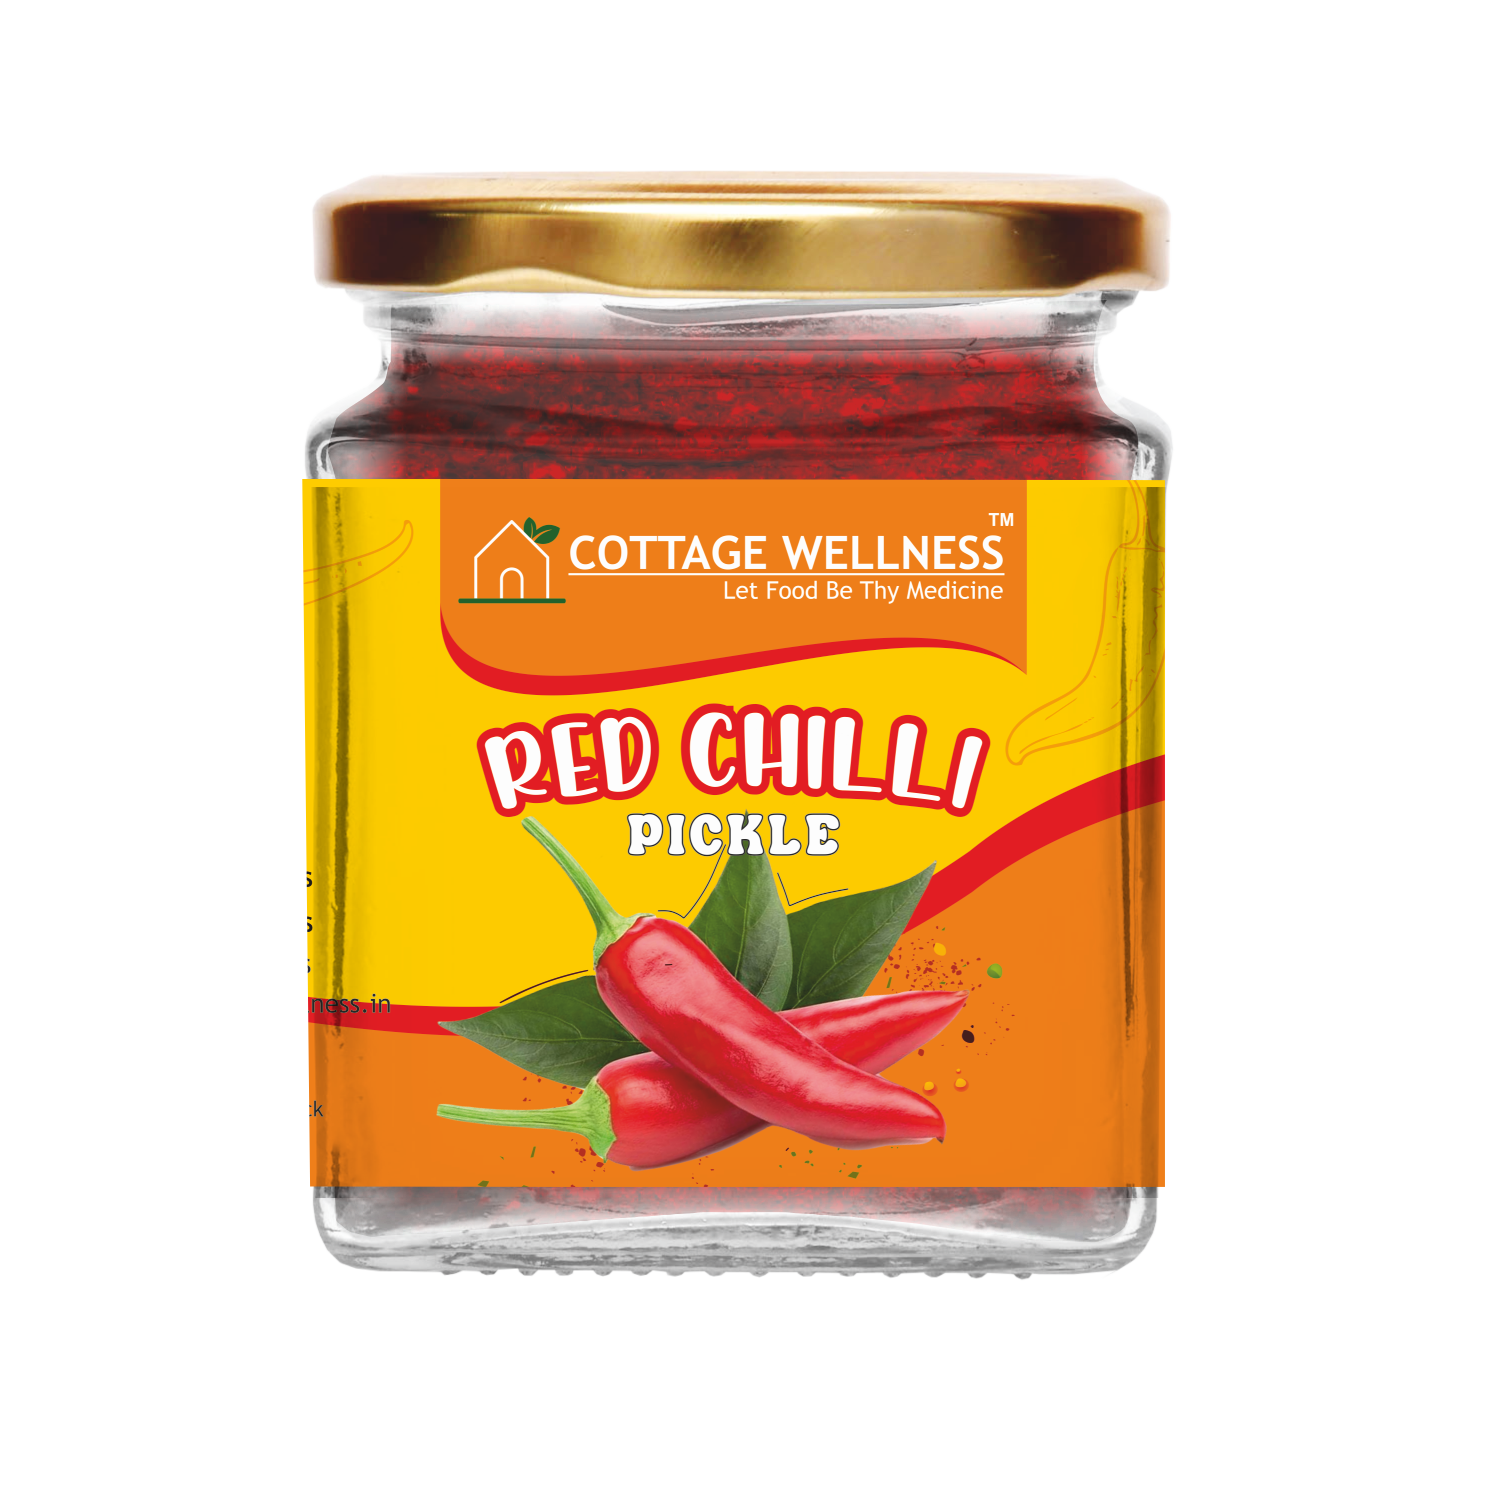 Cottage Wellness Home made Red Chilli Pickle 250gm - hfnl!fe